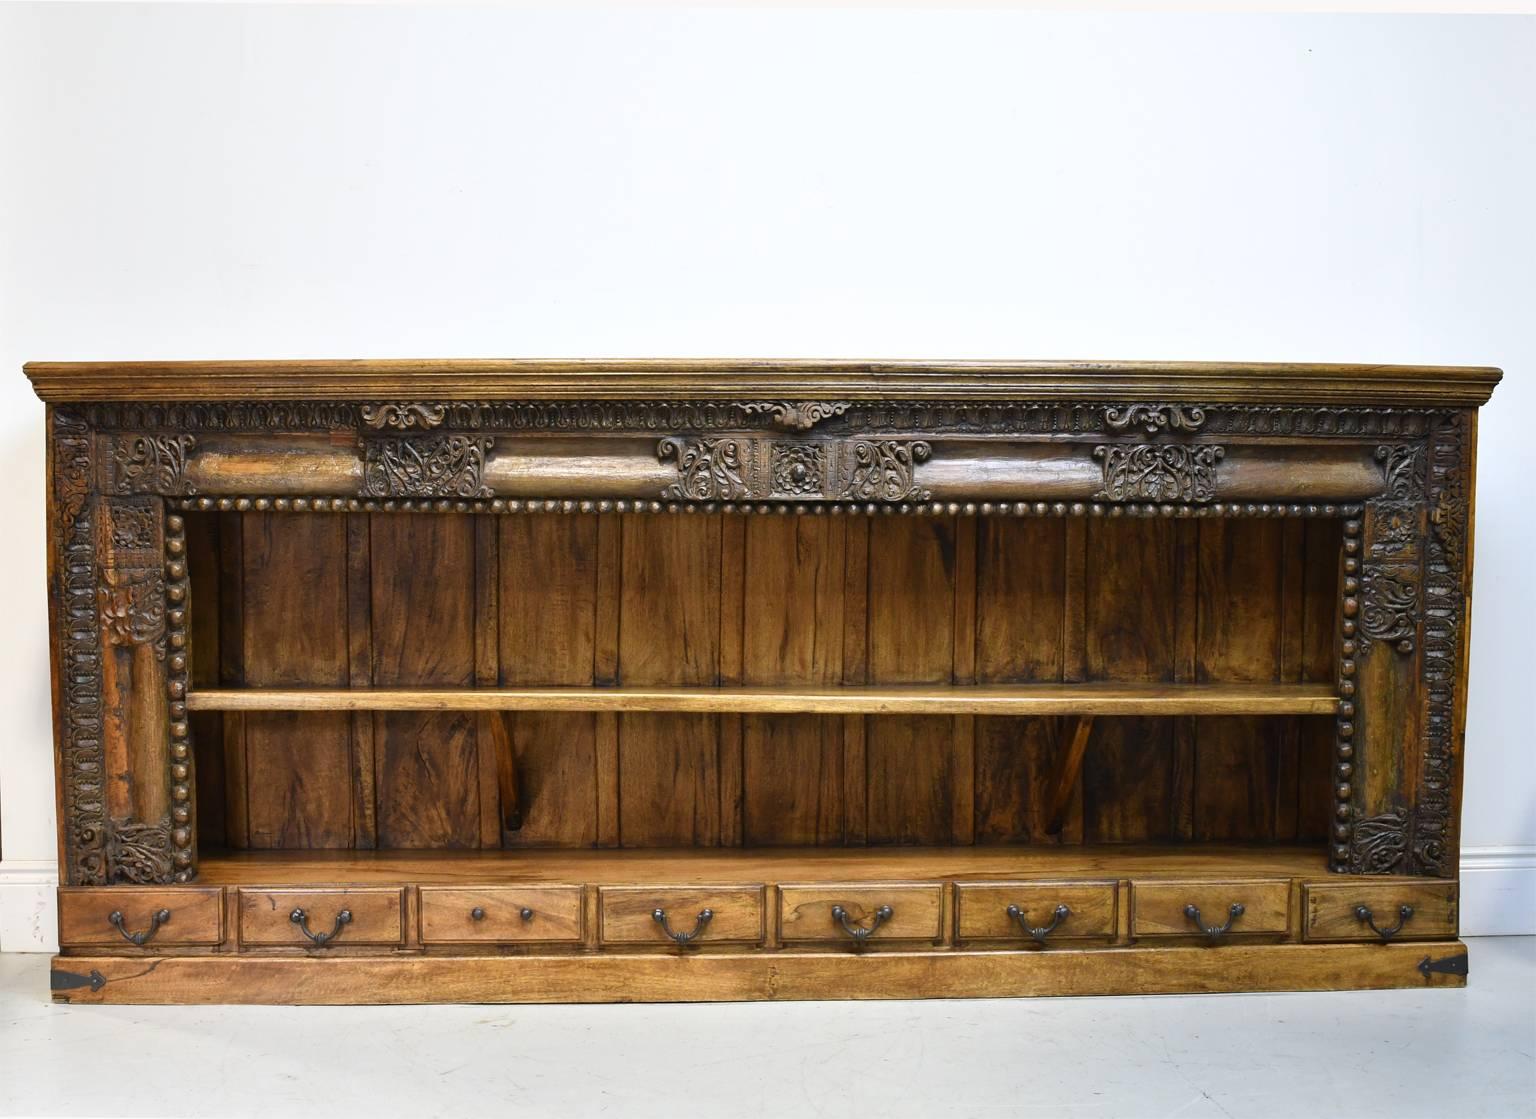 A long bookcase in teak made from antique carved architectural elements of Indian Himalayan influence with two shelves above a set of eight drawers that run horizontally along the bottom. Carved embellishments include acanthus leaves, lotus and